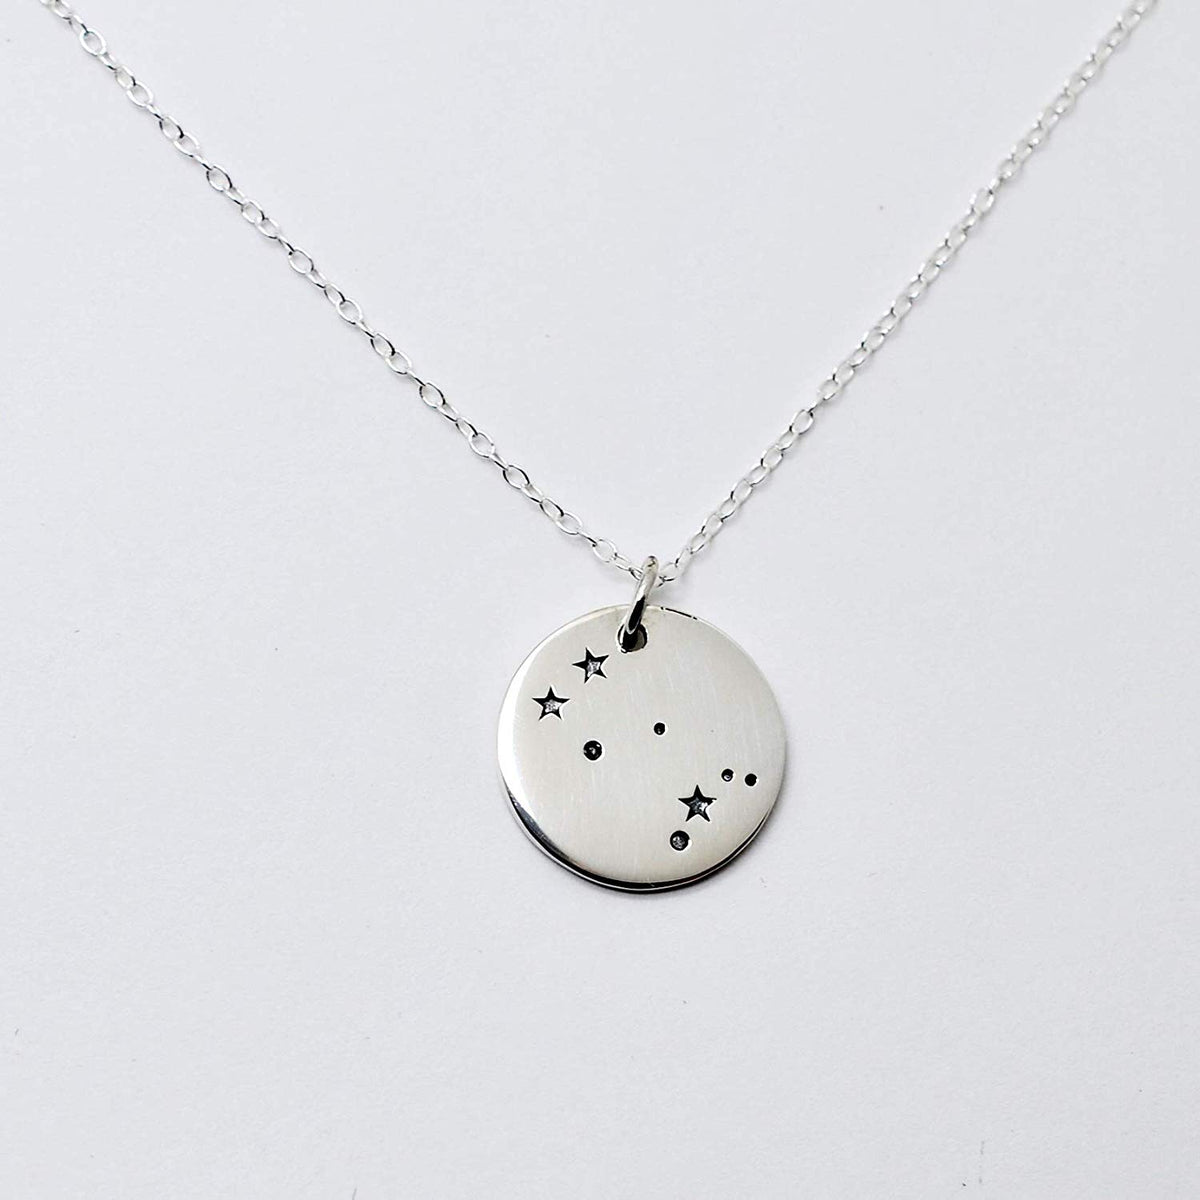 Gemini Zodiac Sign Sterling Silver Constellation Necklace - Love It Personalized